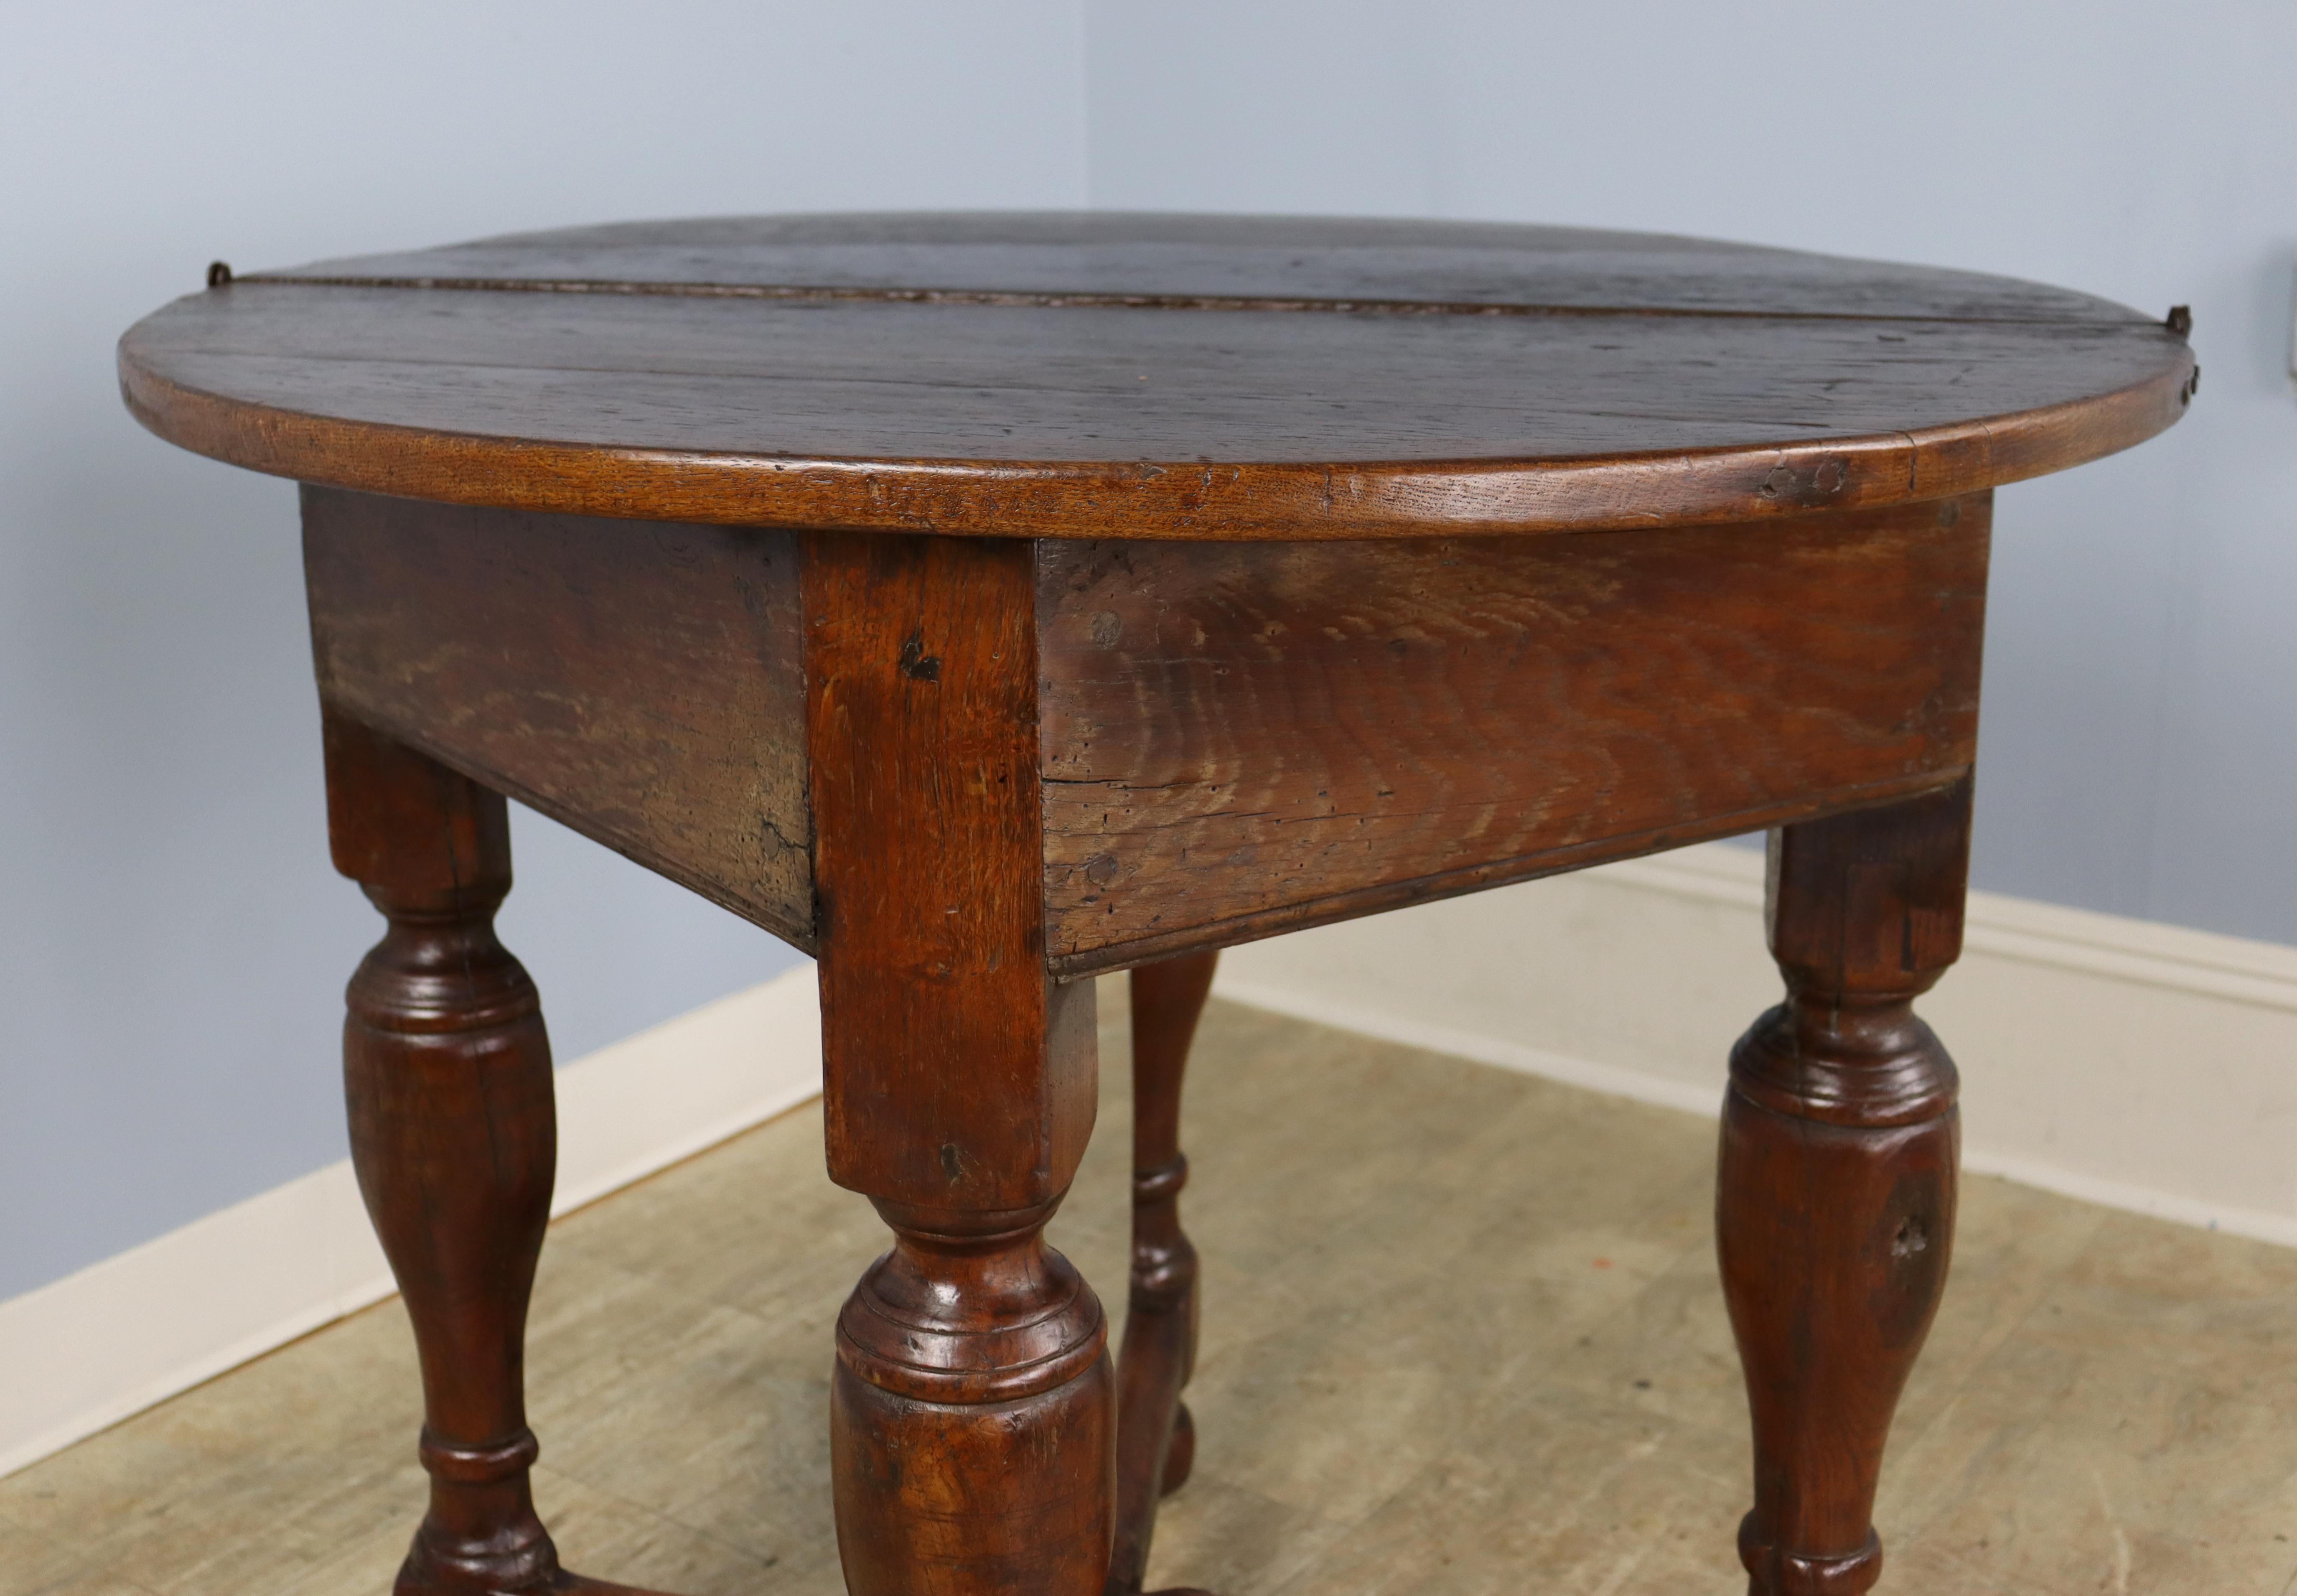 A credence table is a small side table in the sanctuary of a Christian church which is used in the celebration of the Eucharist. In this case, the table has been fashioned of dark lustrous oak and can be folded in to create a demi lune, suitable for